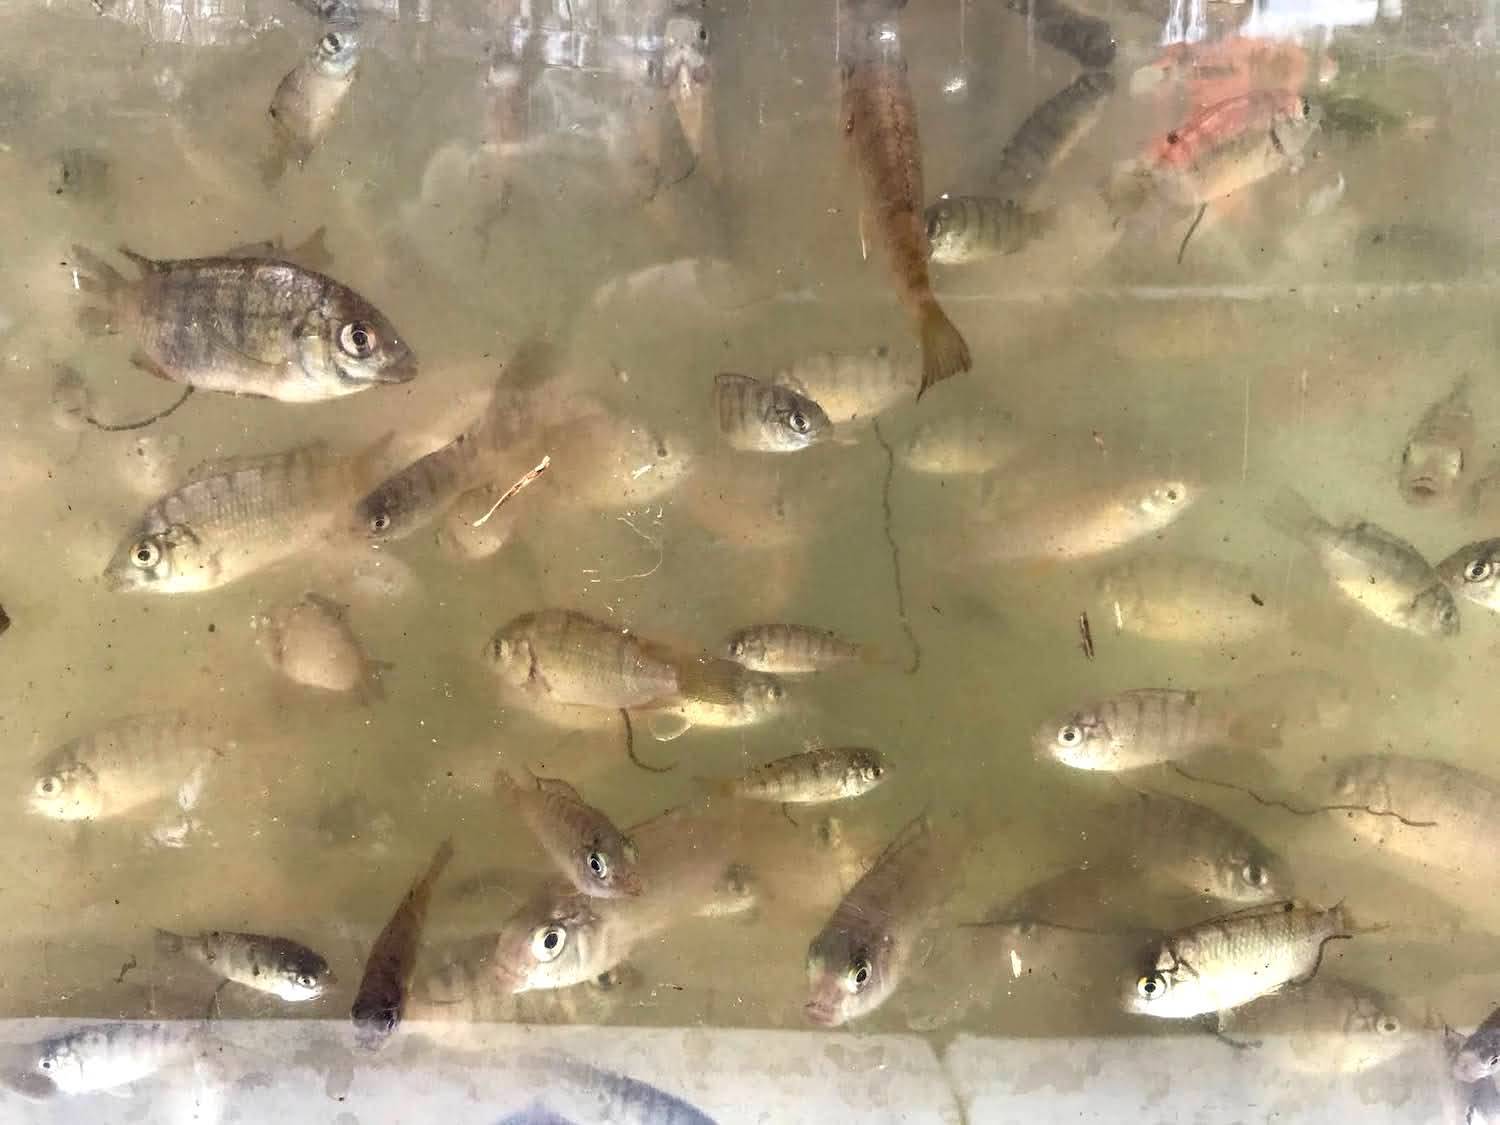 Invasive baby tilapia are relocated from Loko ea to partner schoolsʻ aquaponics systems. December 2020